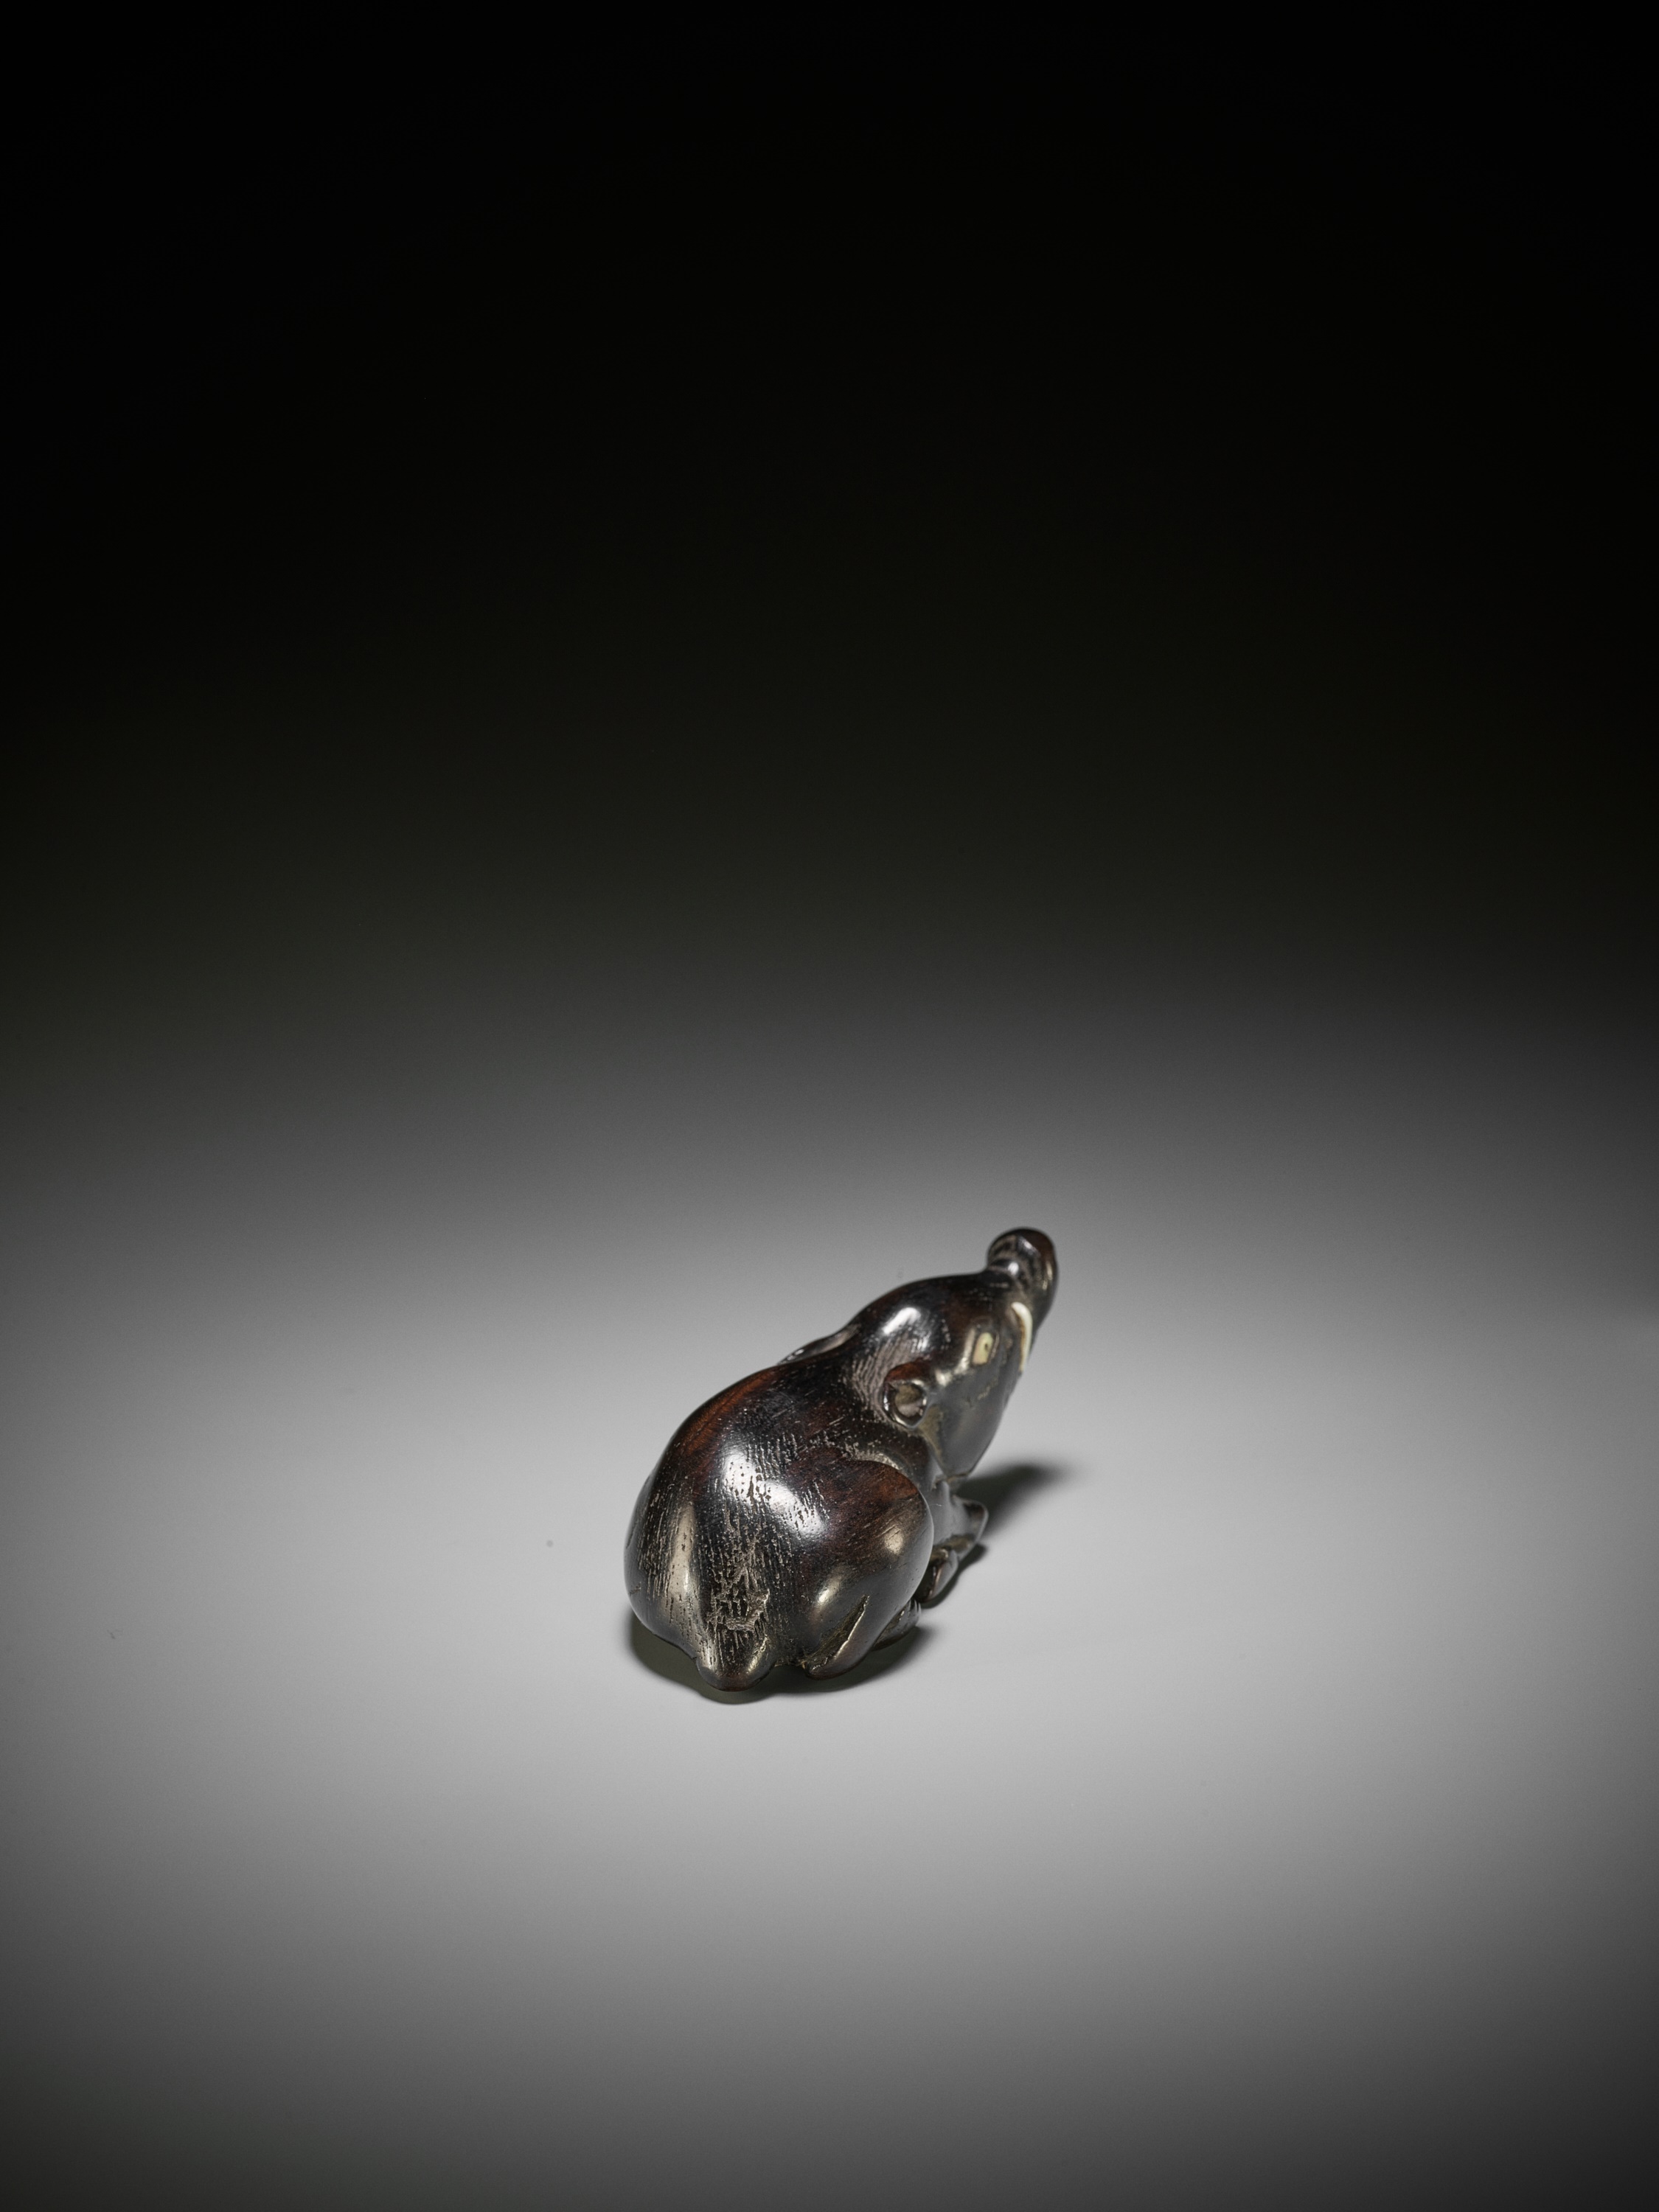 A LARGE AND OLD DARK WOOD NETSUKE OF A RECUMBENT BOAR - Image 8 of 9